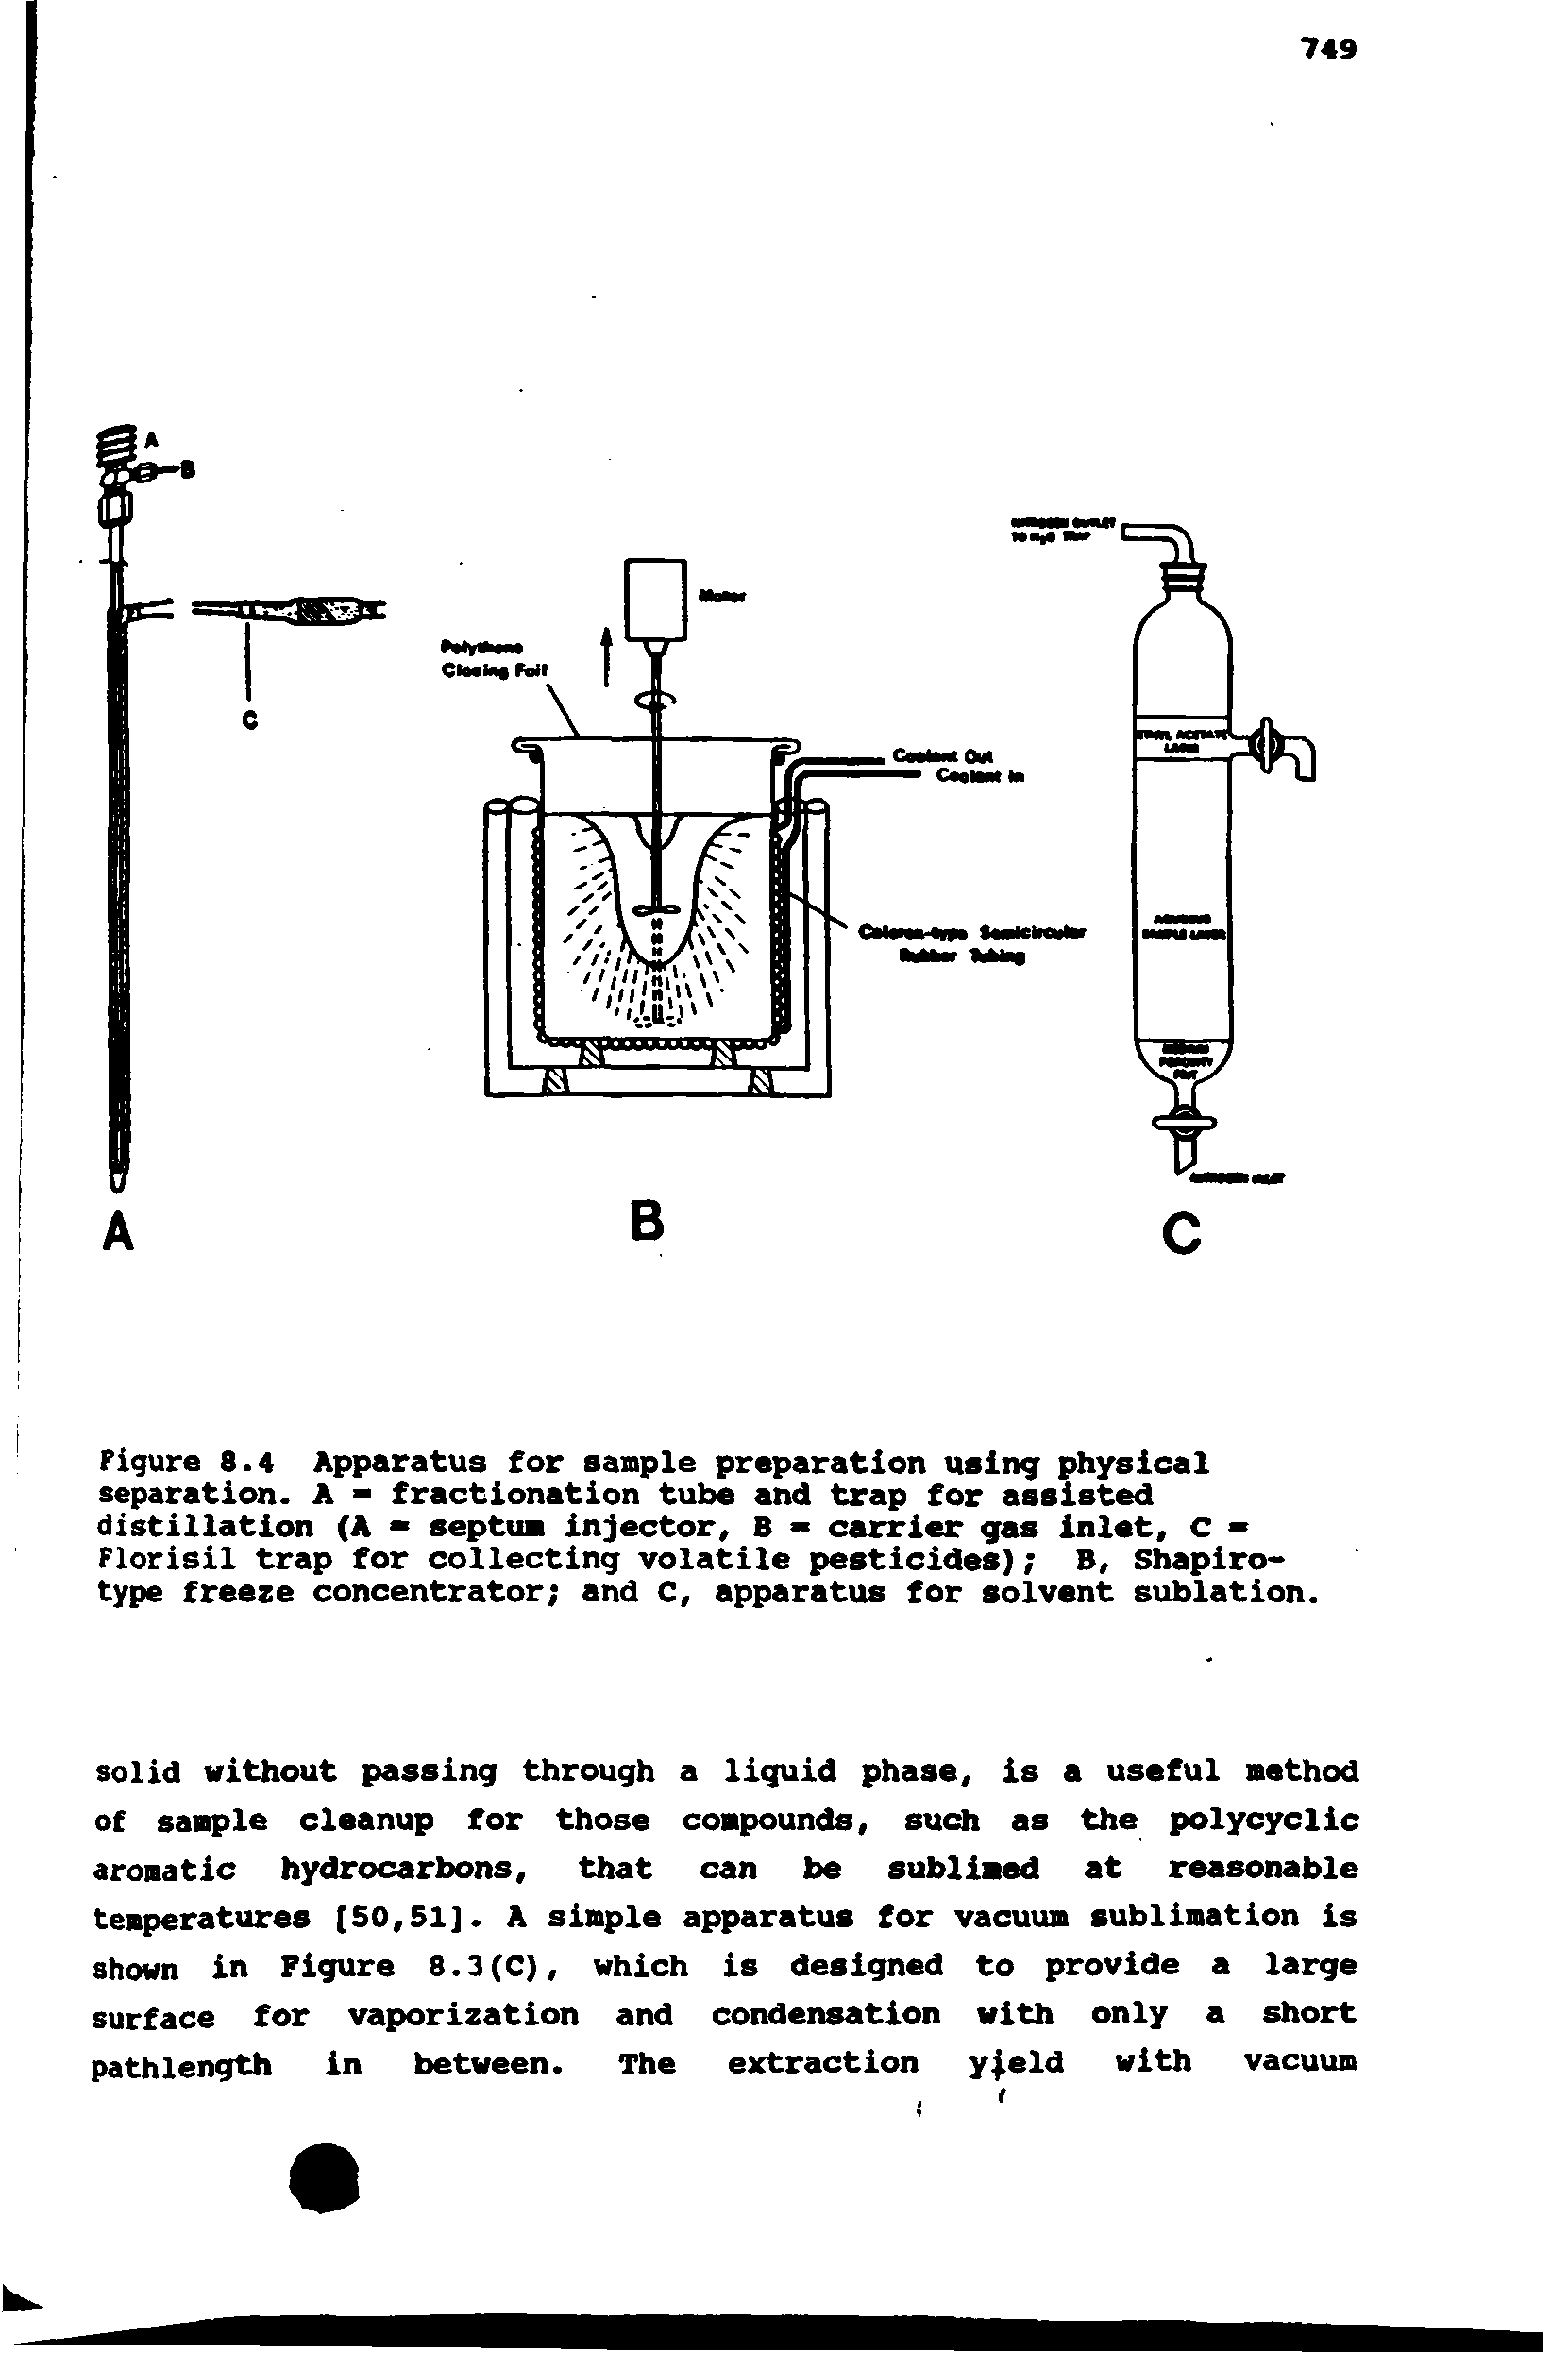 Figure 8.4 Apparatus for sample preparation using physical separation. A - fractionation tube and trap for assisted distillation (A septum injector, B carrier gas inlet, C Florisil trap for collecting volatile pesticides) B, Shapiro-type freeze concentrator and C, apparatus for solvent sublation.